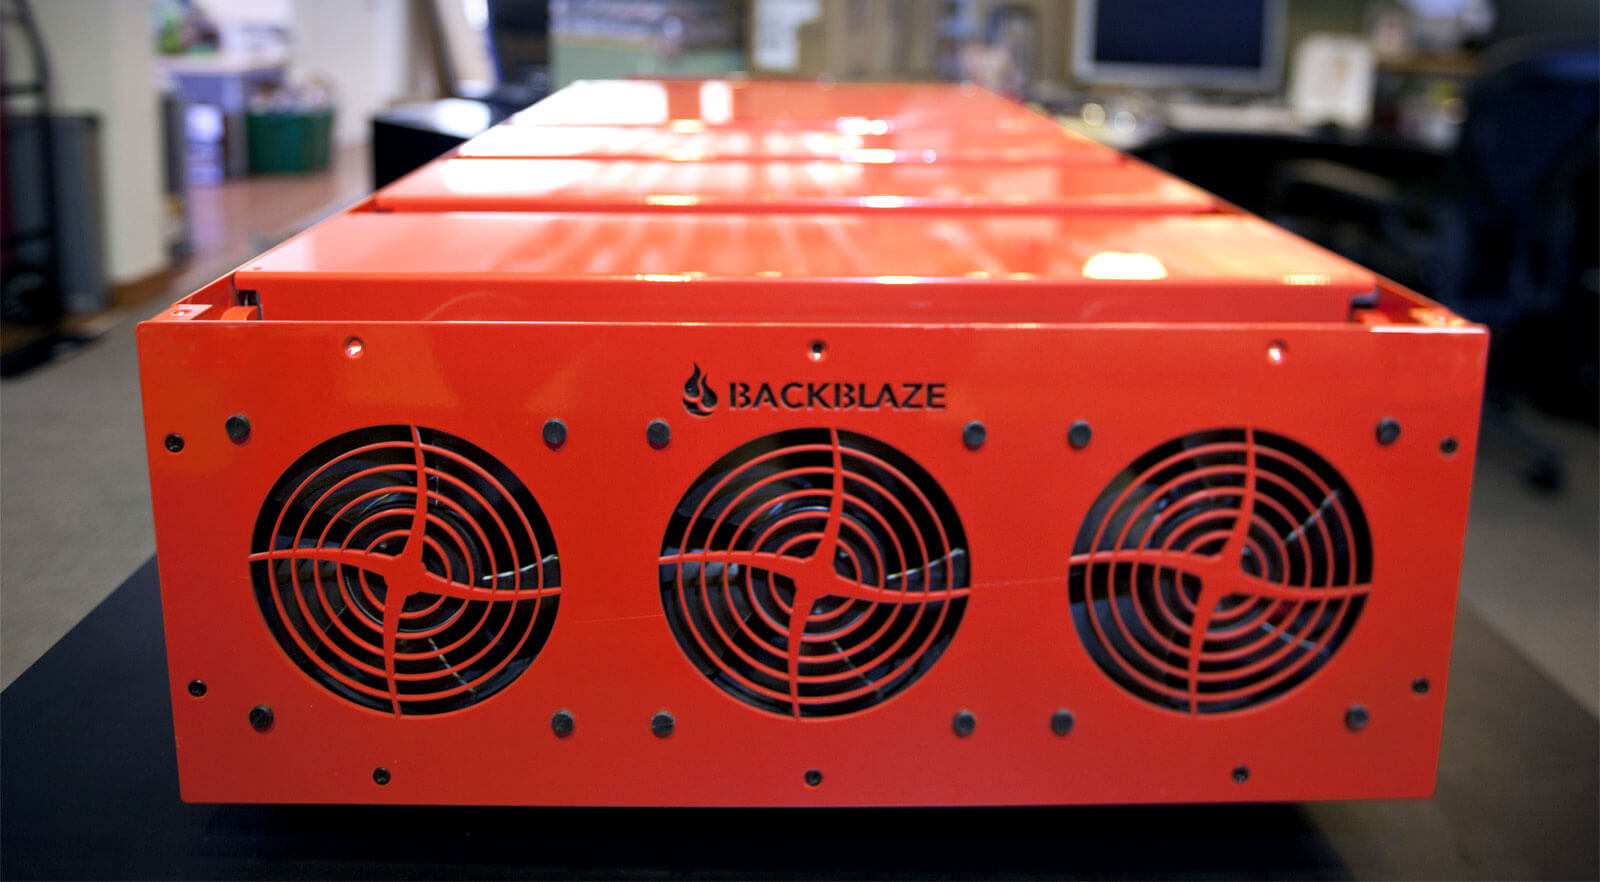 Backblaze 5.0 increases restore/access speed, adds image preview, and more